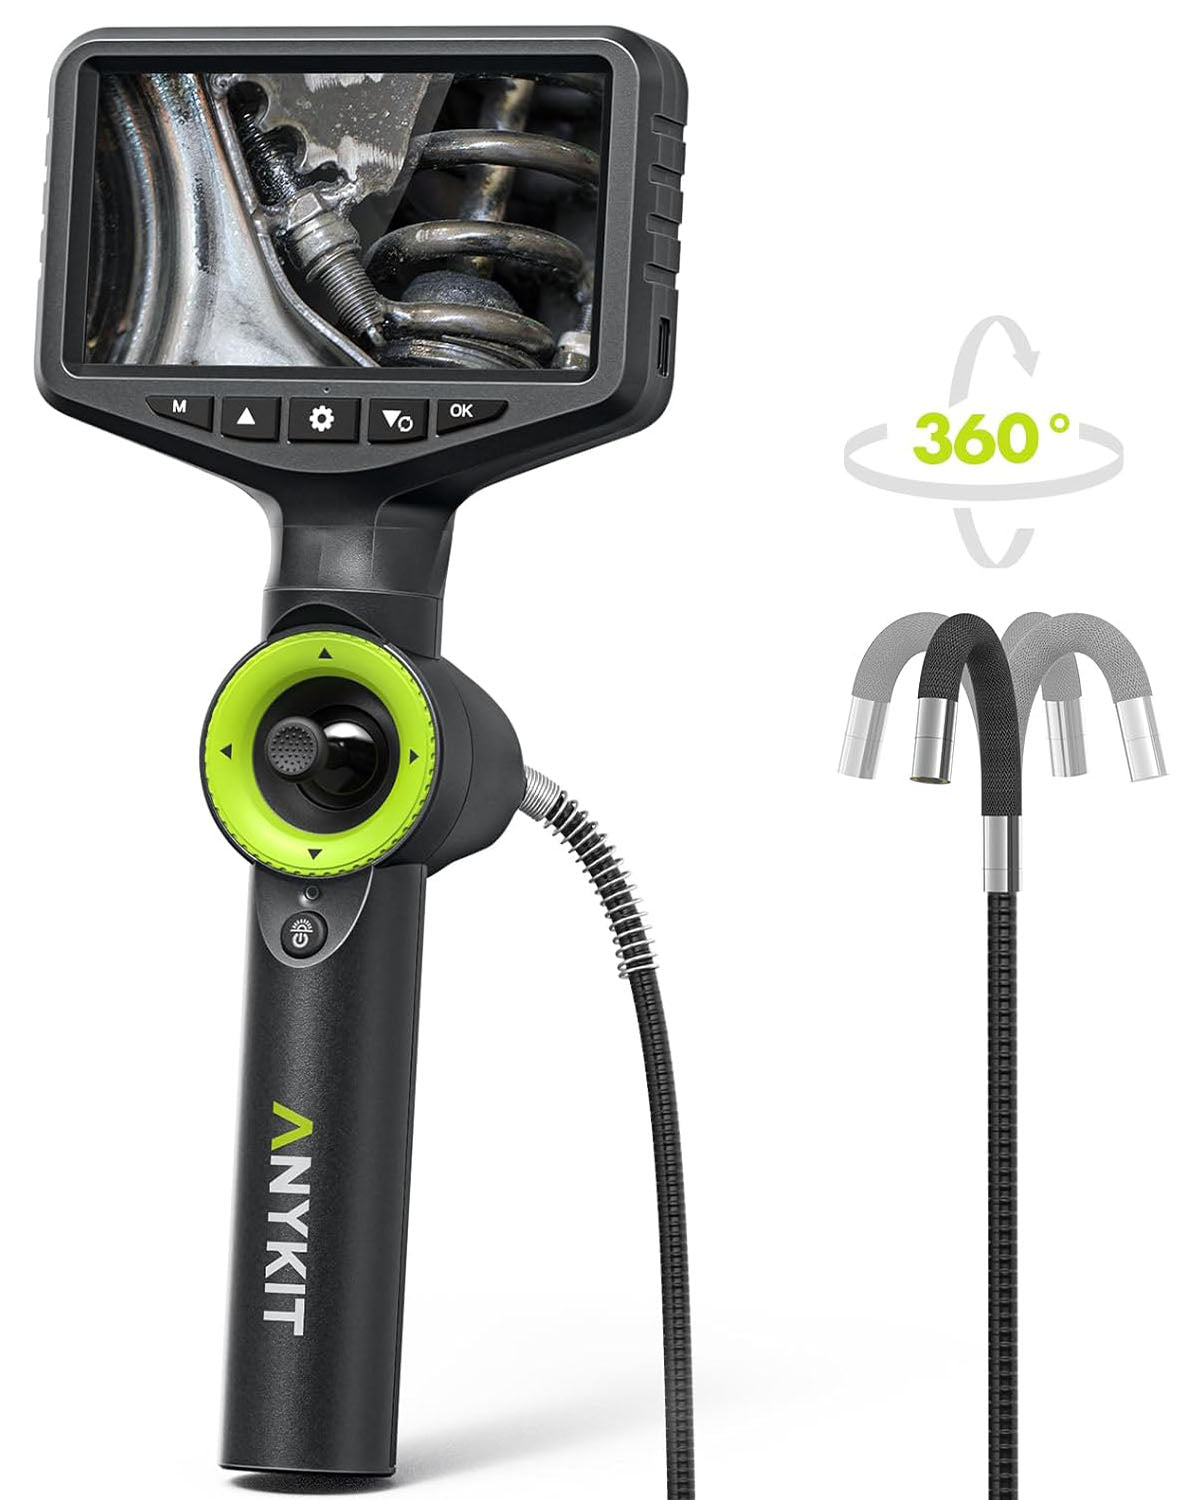 Anykit 360° Articulating Borescope, Industrial Endoscope with 0.26in Articulated Snake Camera, 5-inch IPS Video Inspection Camera with Light for Automotive Mechanics, Maintenance Technicians- 5FT